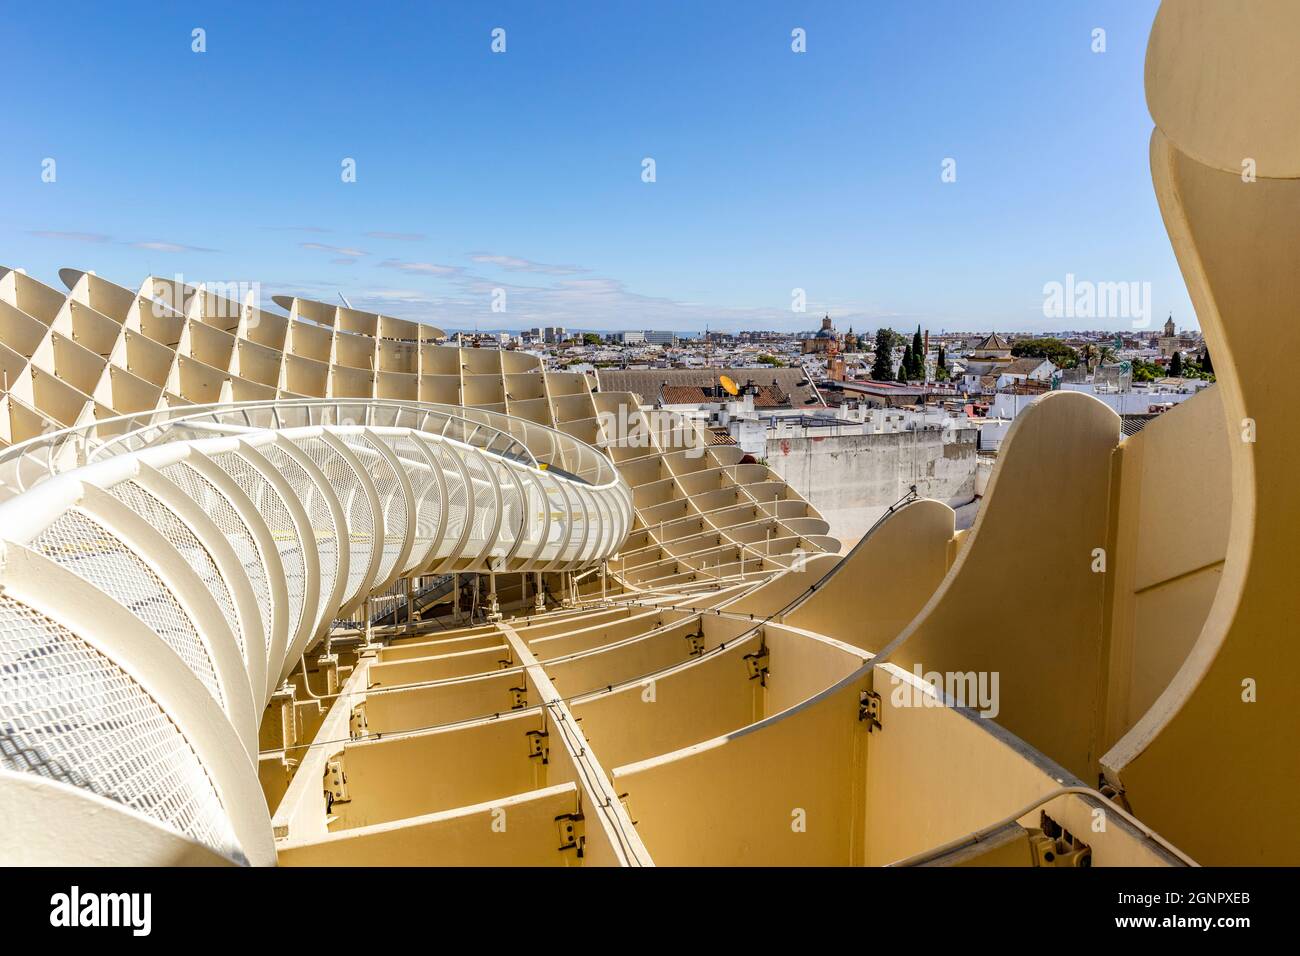 Seville skyline with wooden roof with walkways called Setas de Sevilla in the foreground, Andalusia, Spain Stock Photo